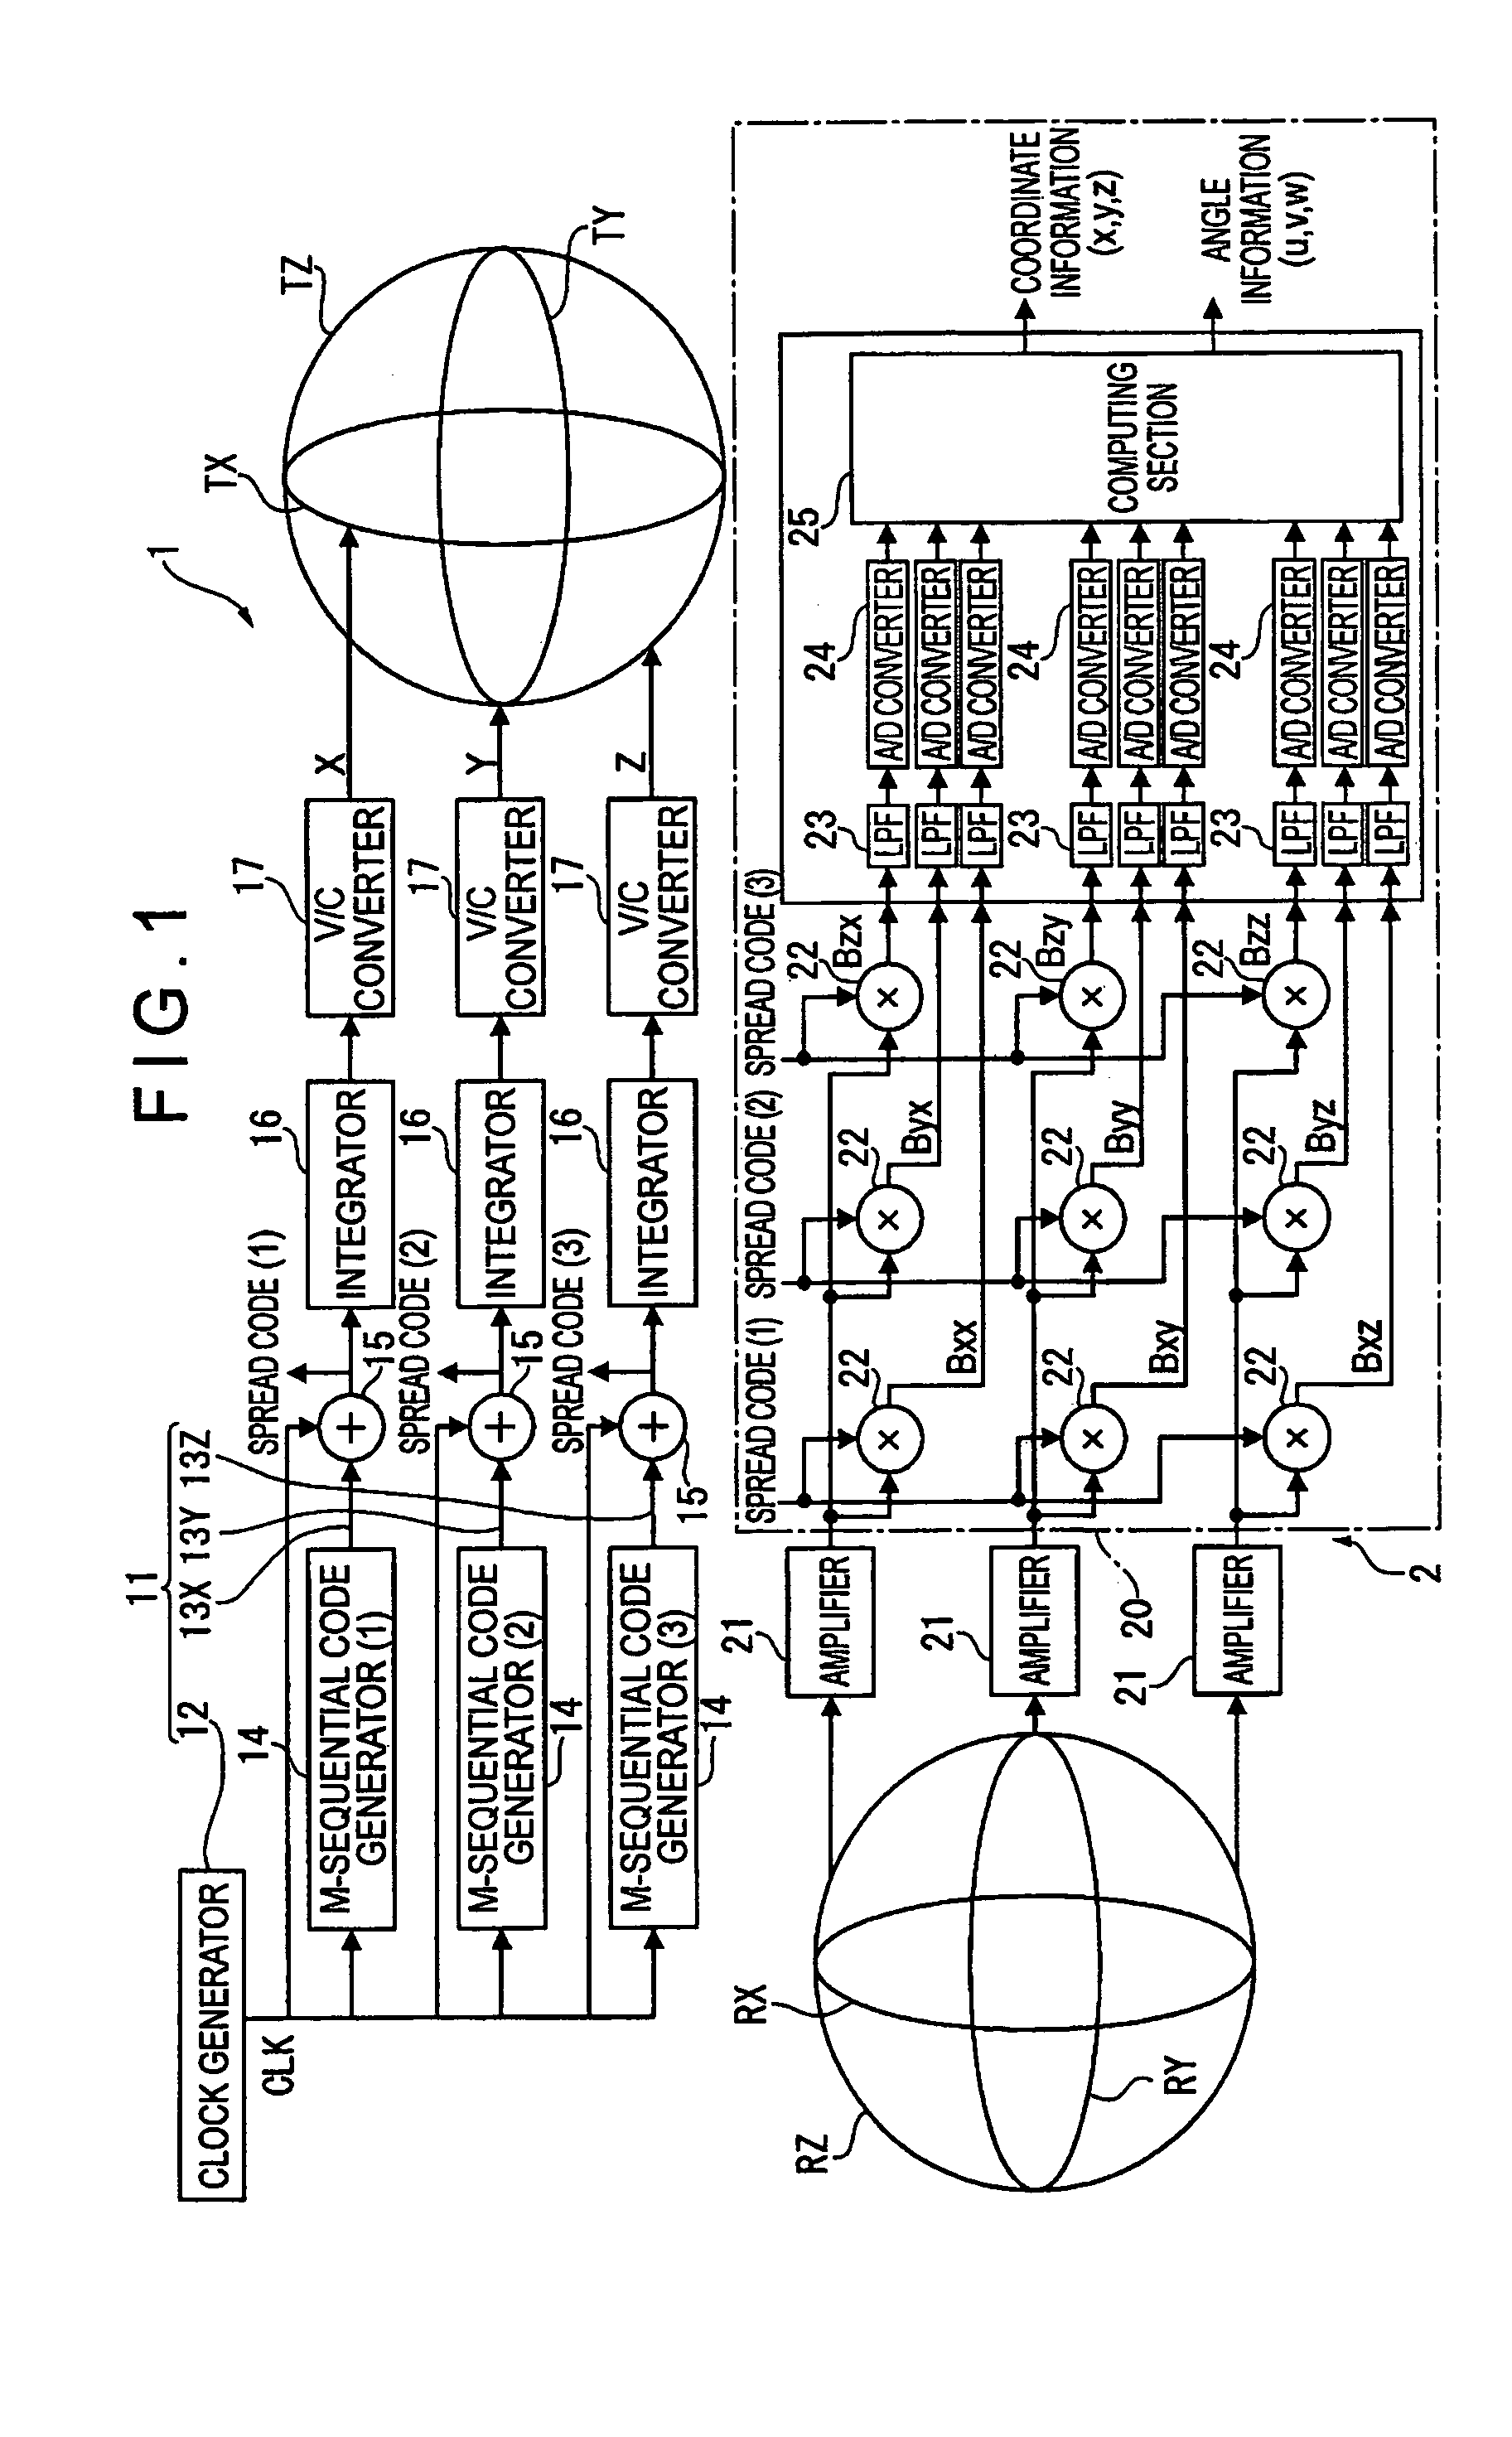 Relative position and/or posture measuring system for measuring relative positions and/or relative postures using a magnetic field generator and a magnetic field detector